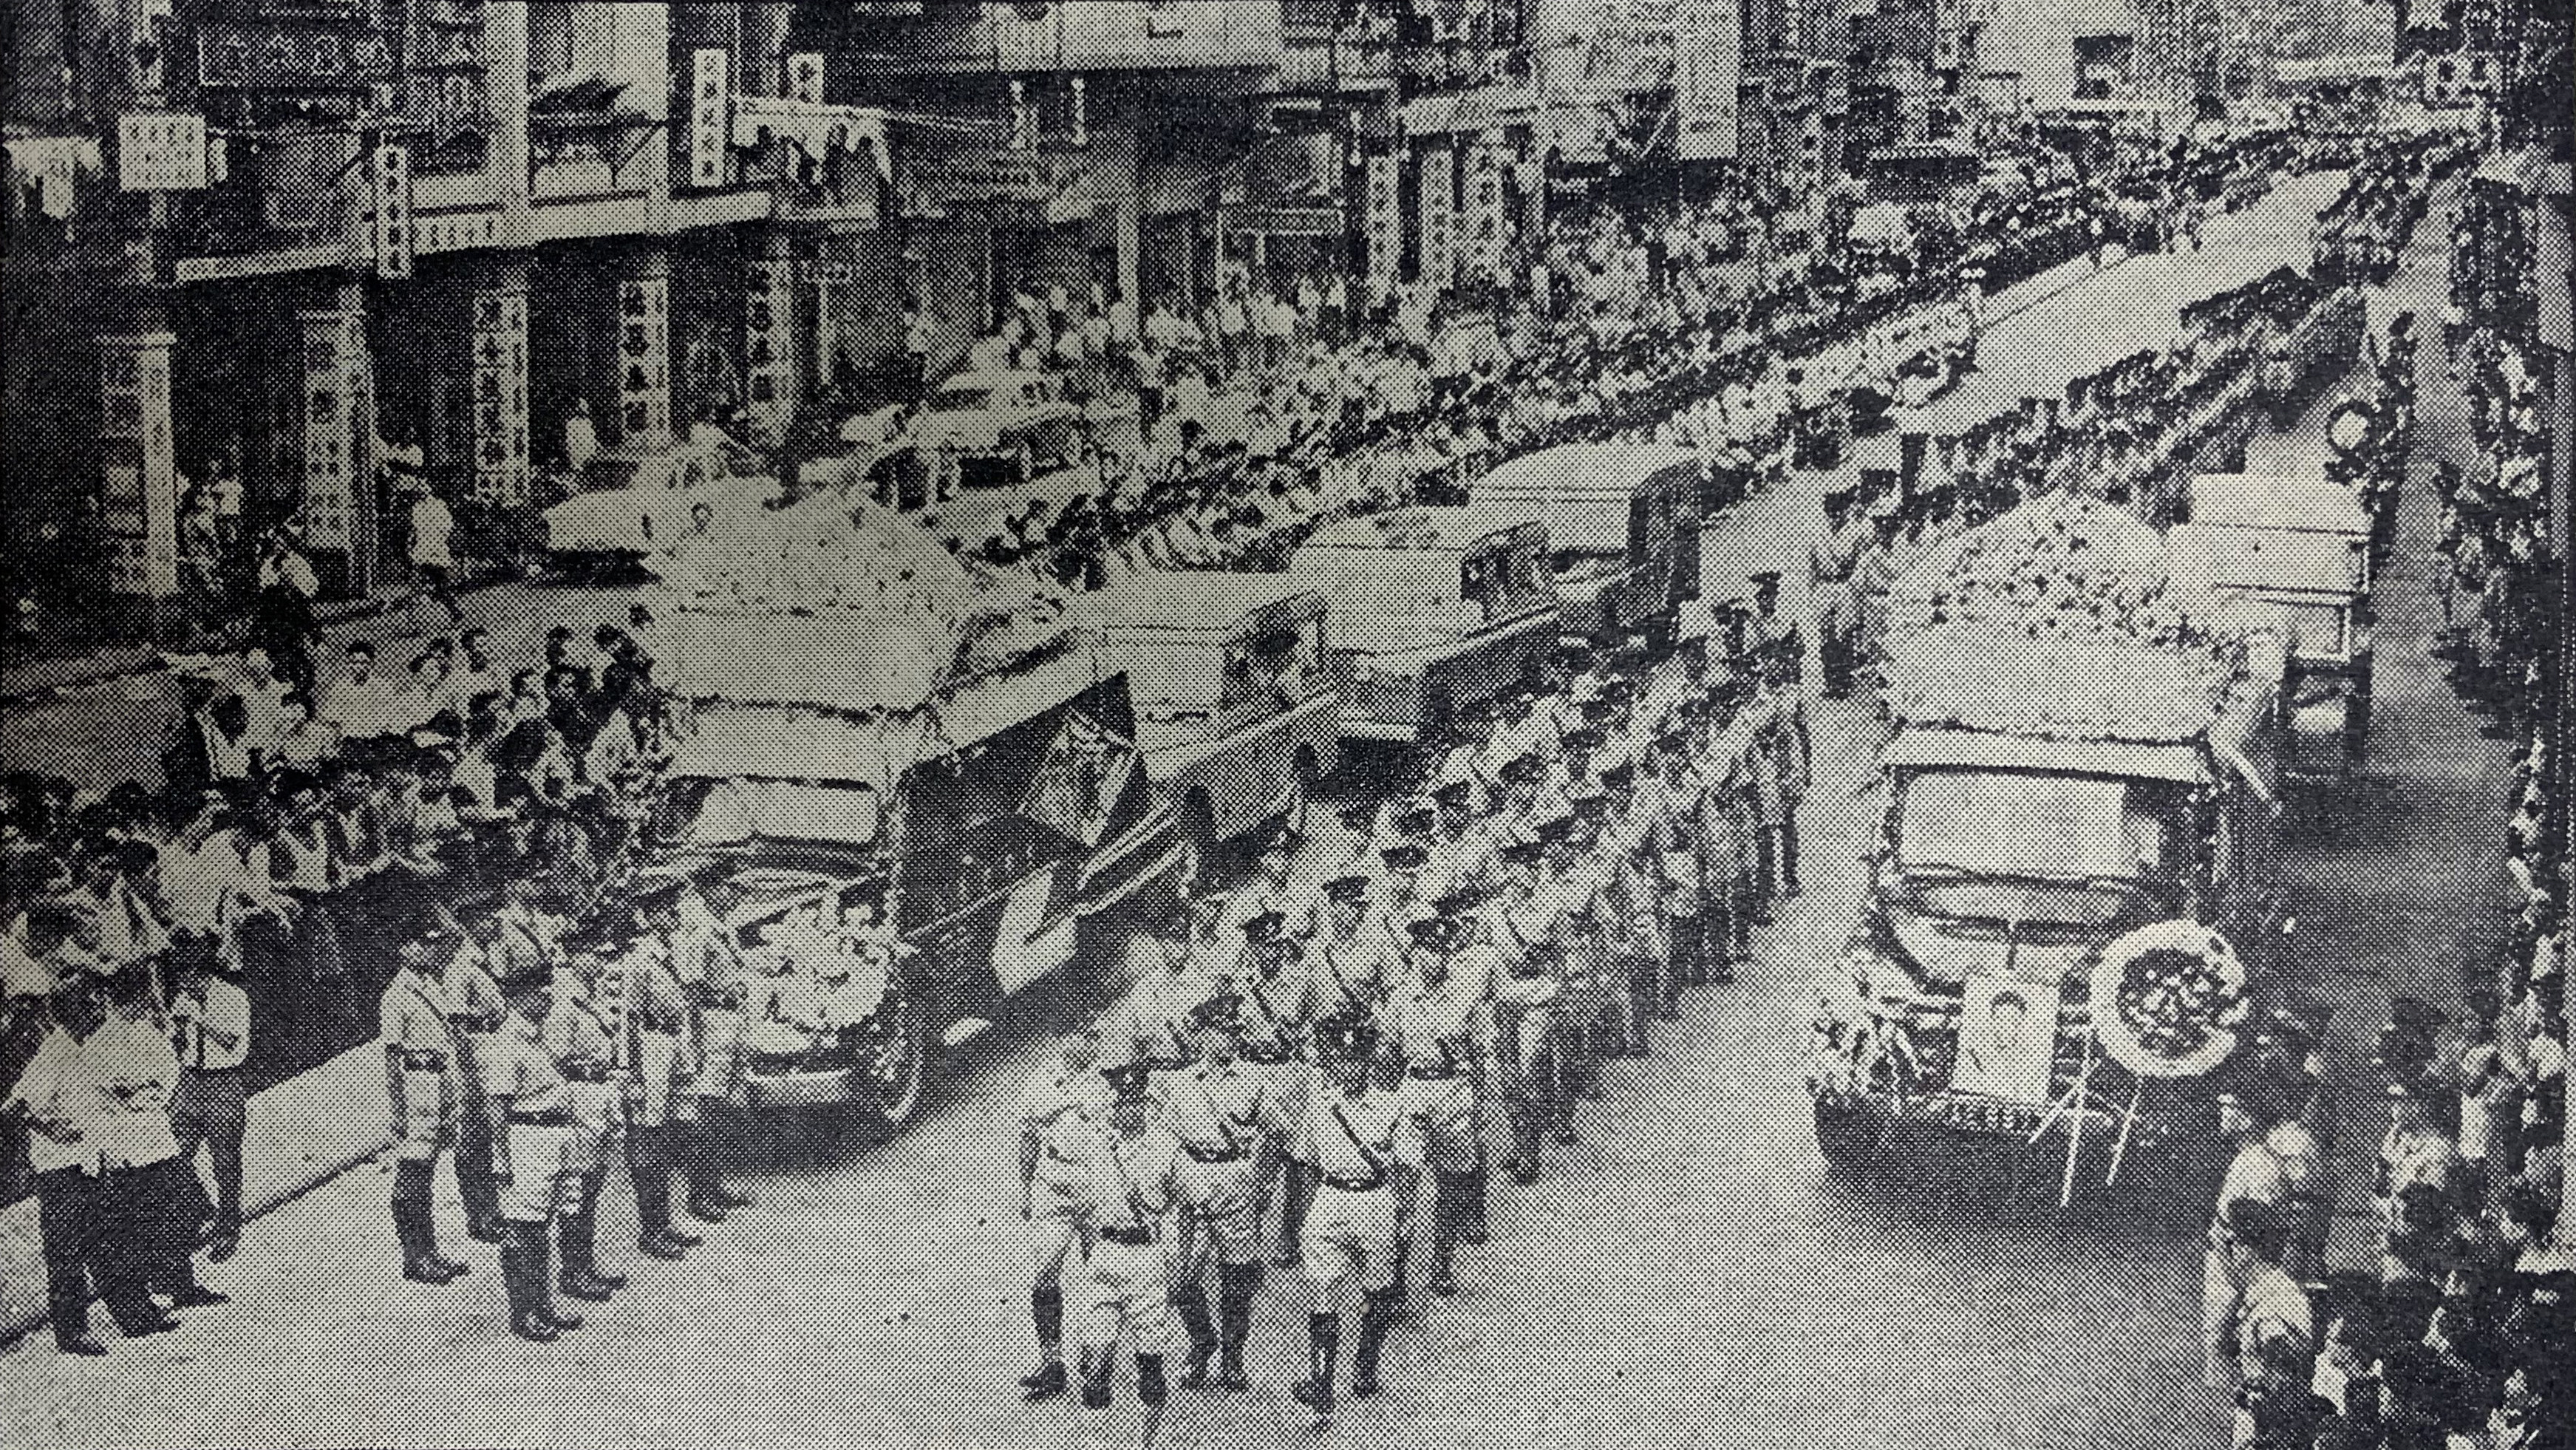 More than 10,000 people lined the route of the funeral procession for two Chinese policemen killed in a gun battle at Tai Po on May 24, 1964. Photo: SCMP.